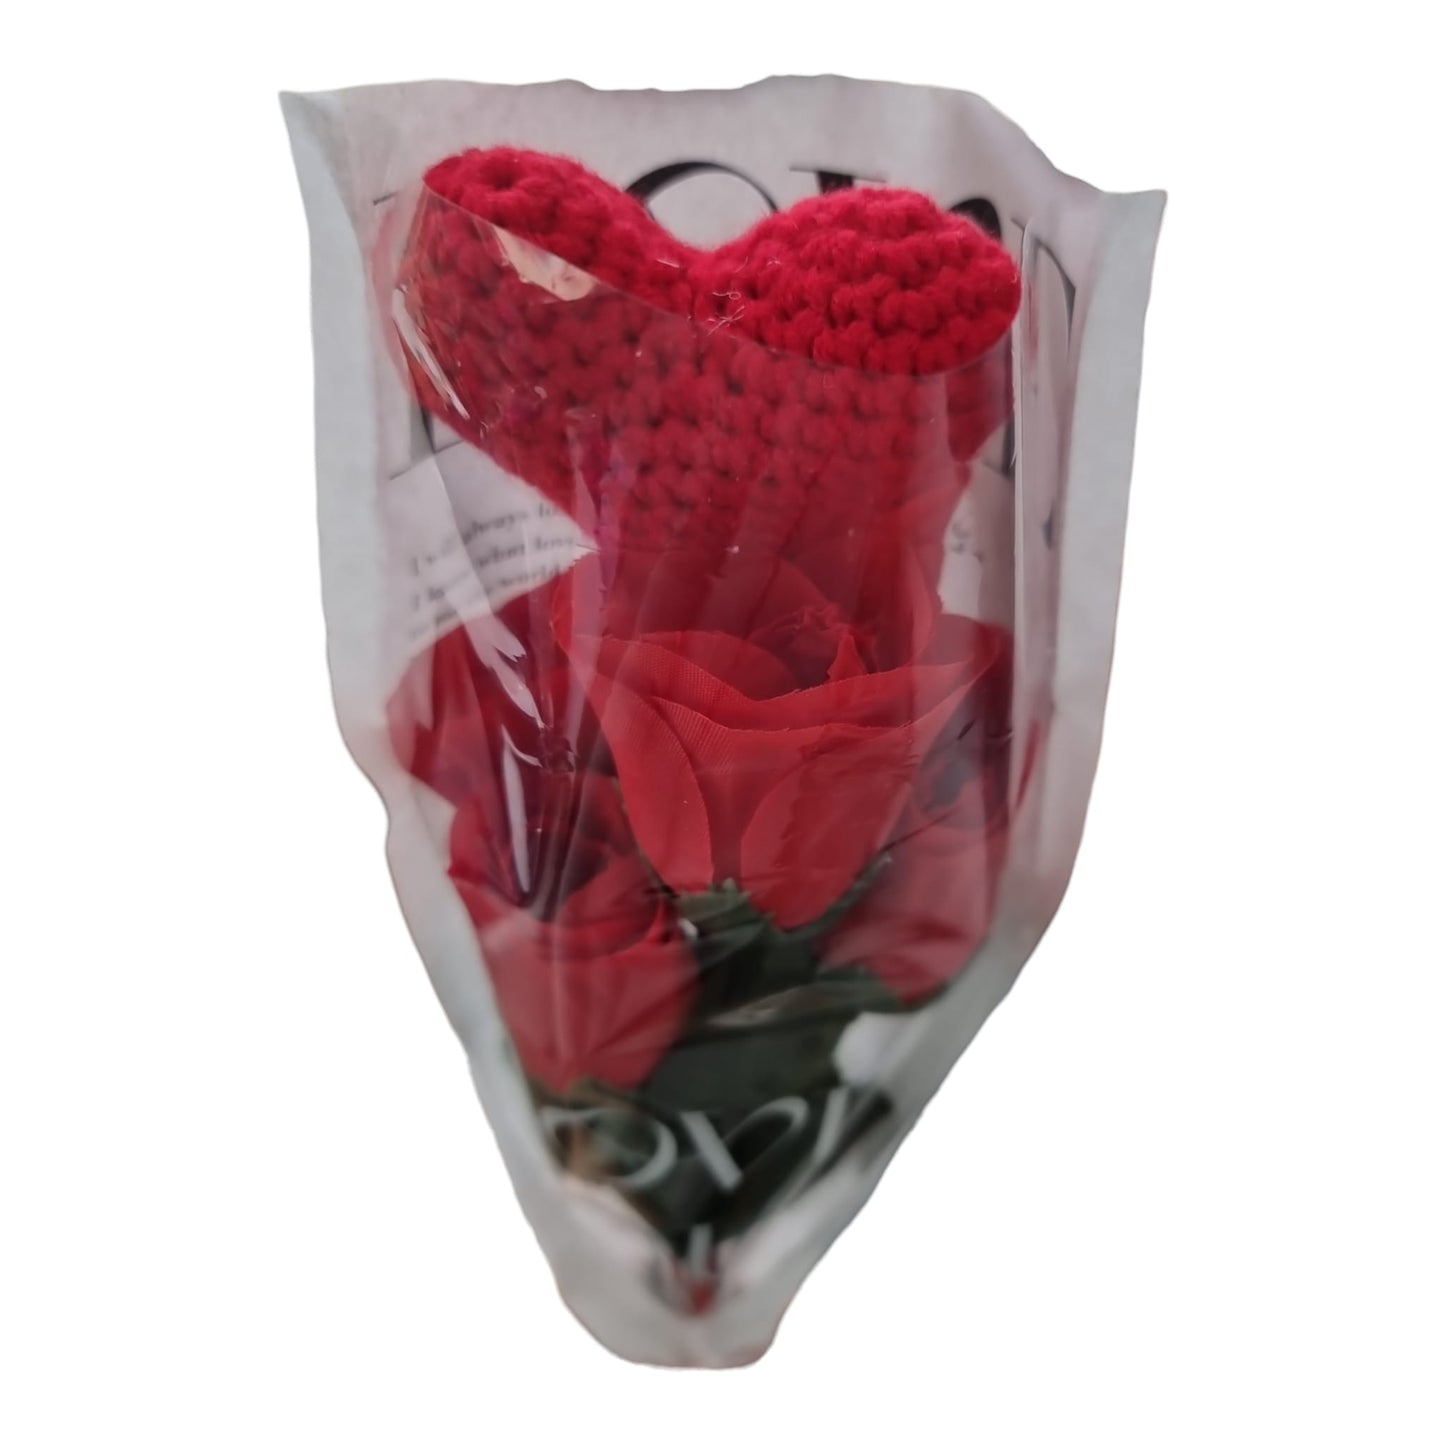 Valentine's Roses: Artificial Flowers with Crochet Heart - Timeless Tokens of Love - Auras Workshop  -   -   - Cyprus & Greece - Wholesale - Retail #